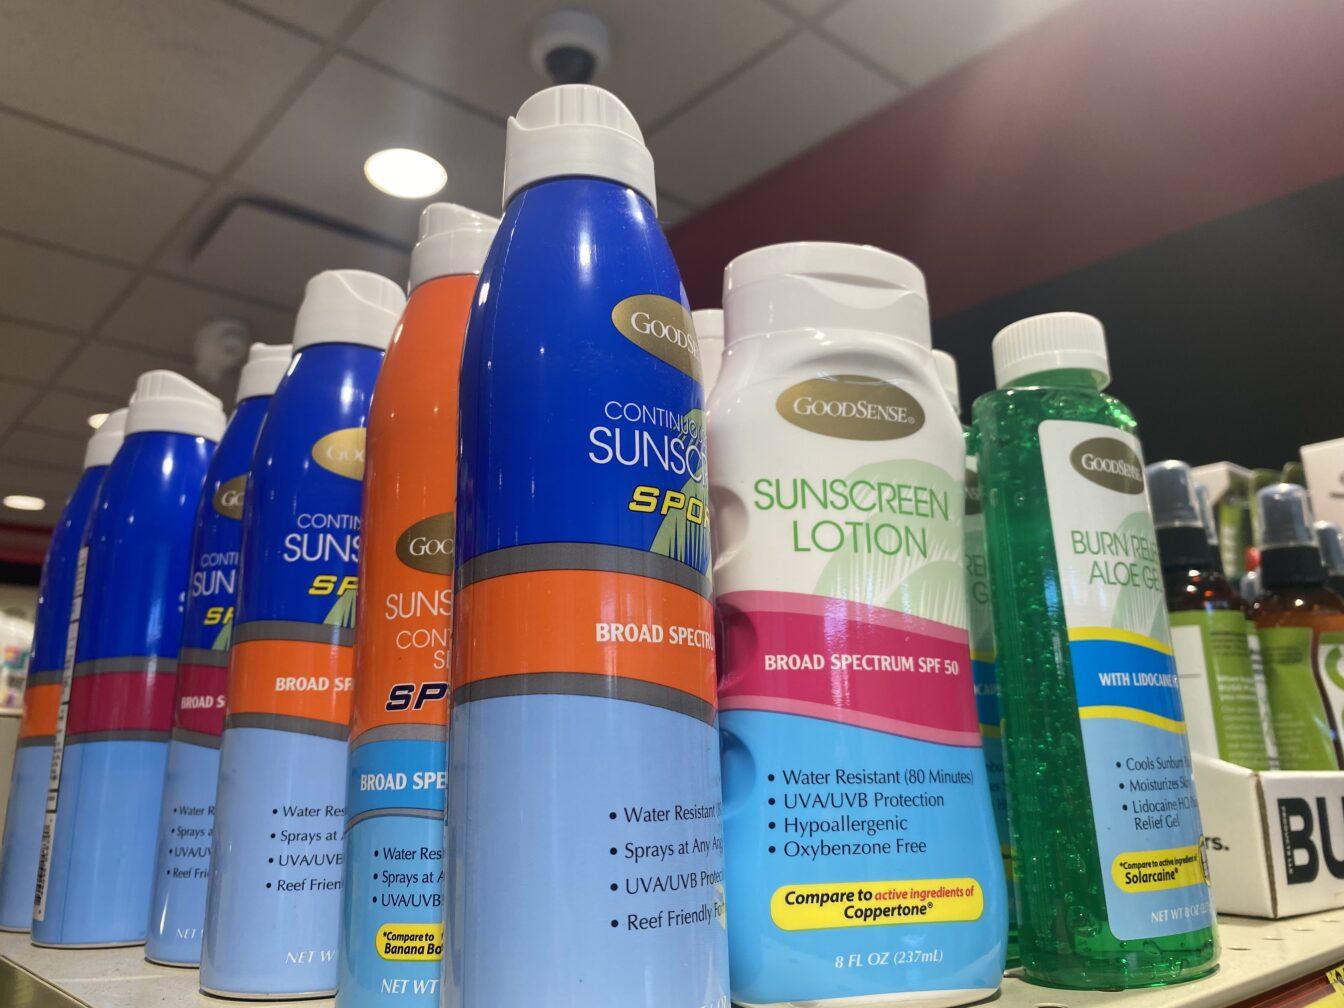 Sunscreen at the store